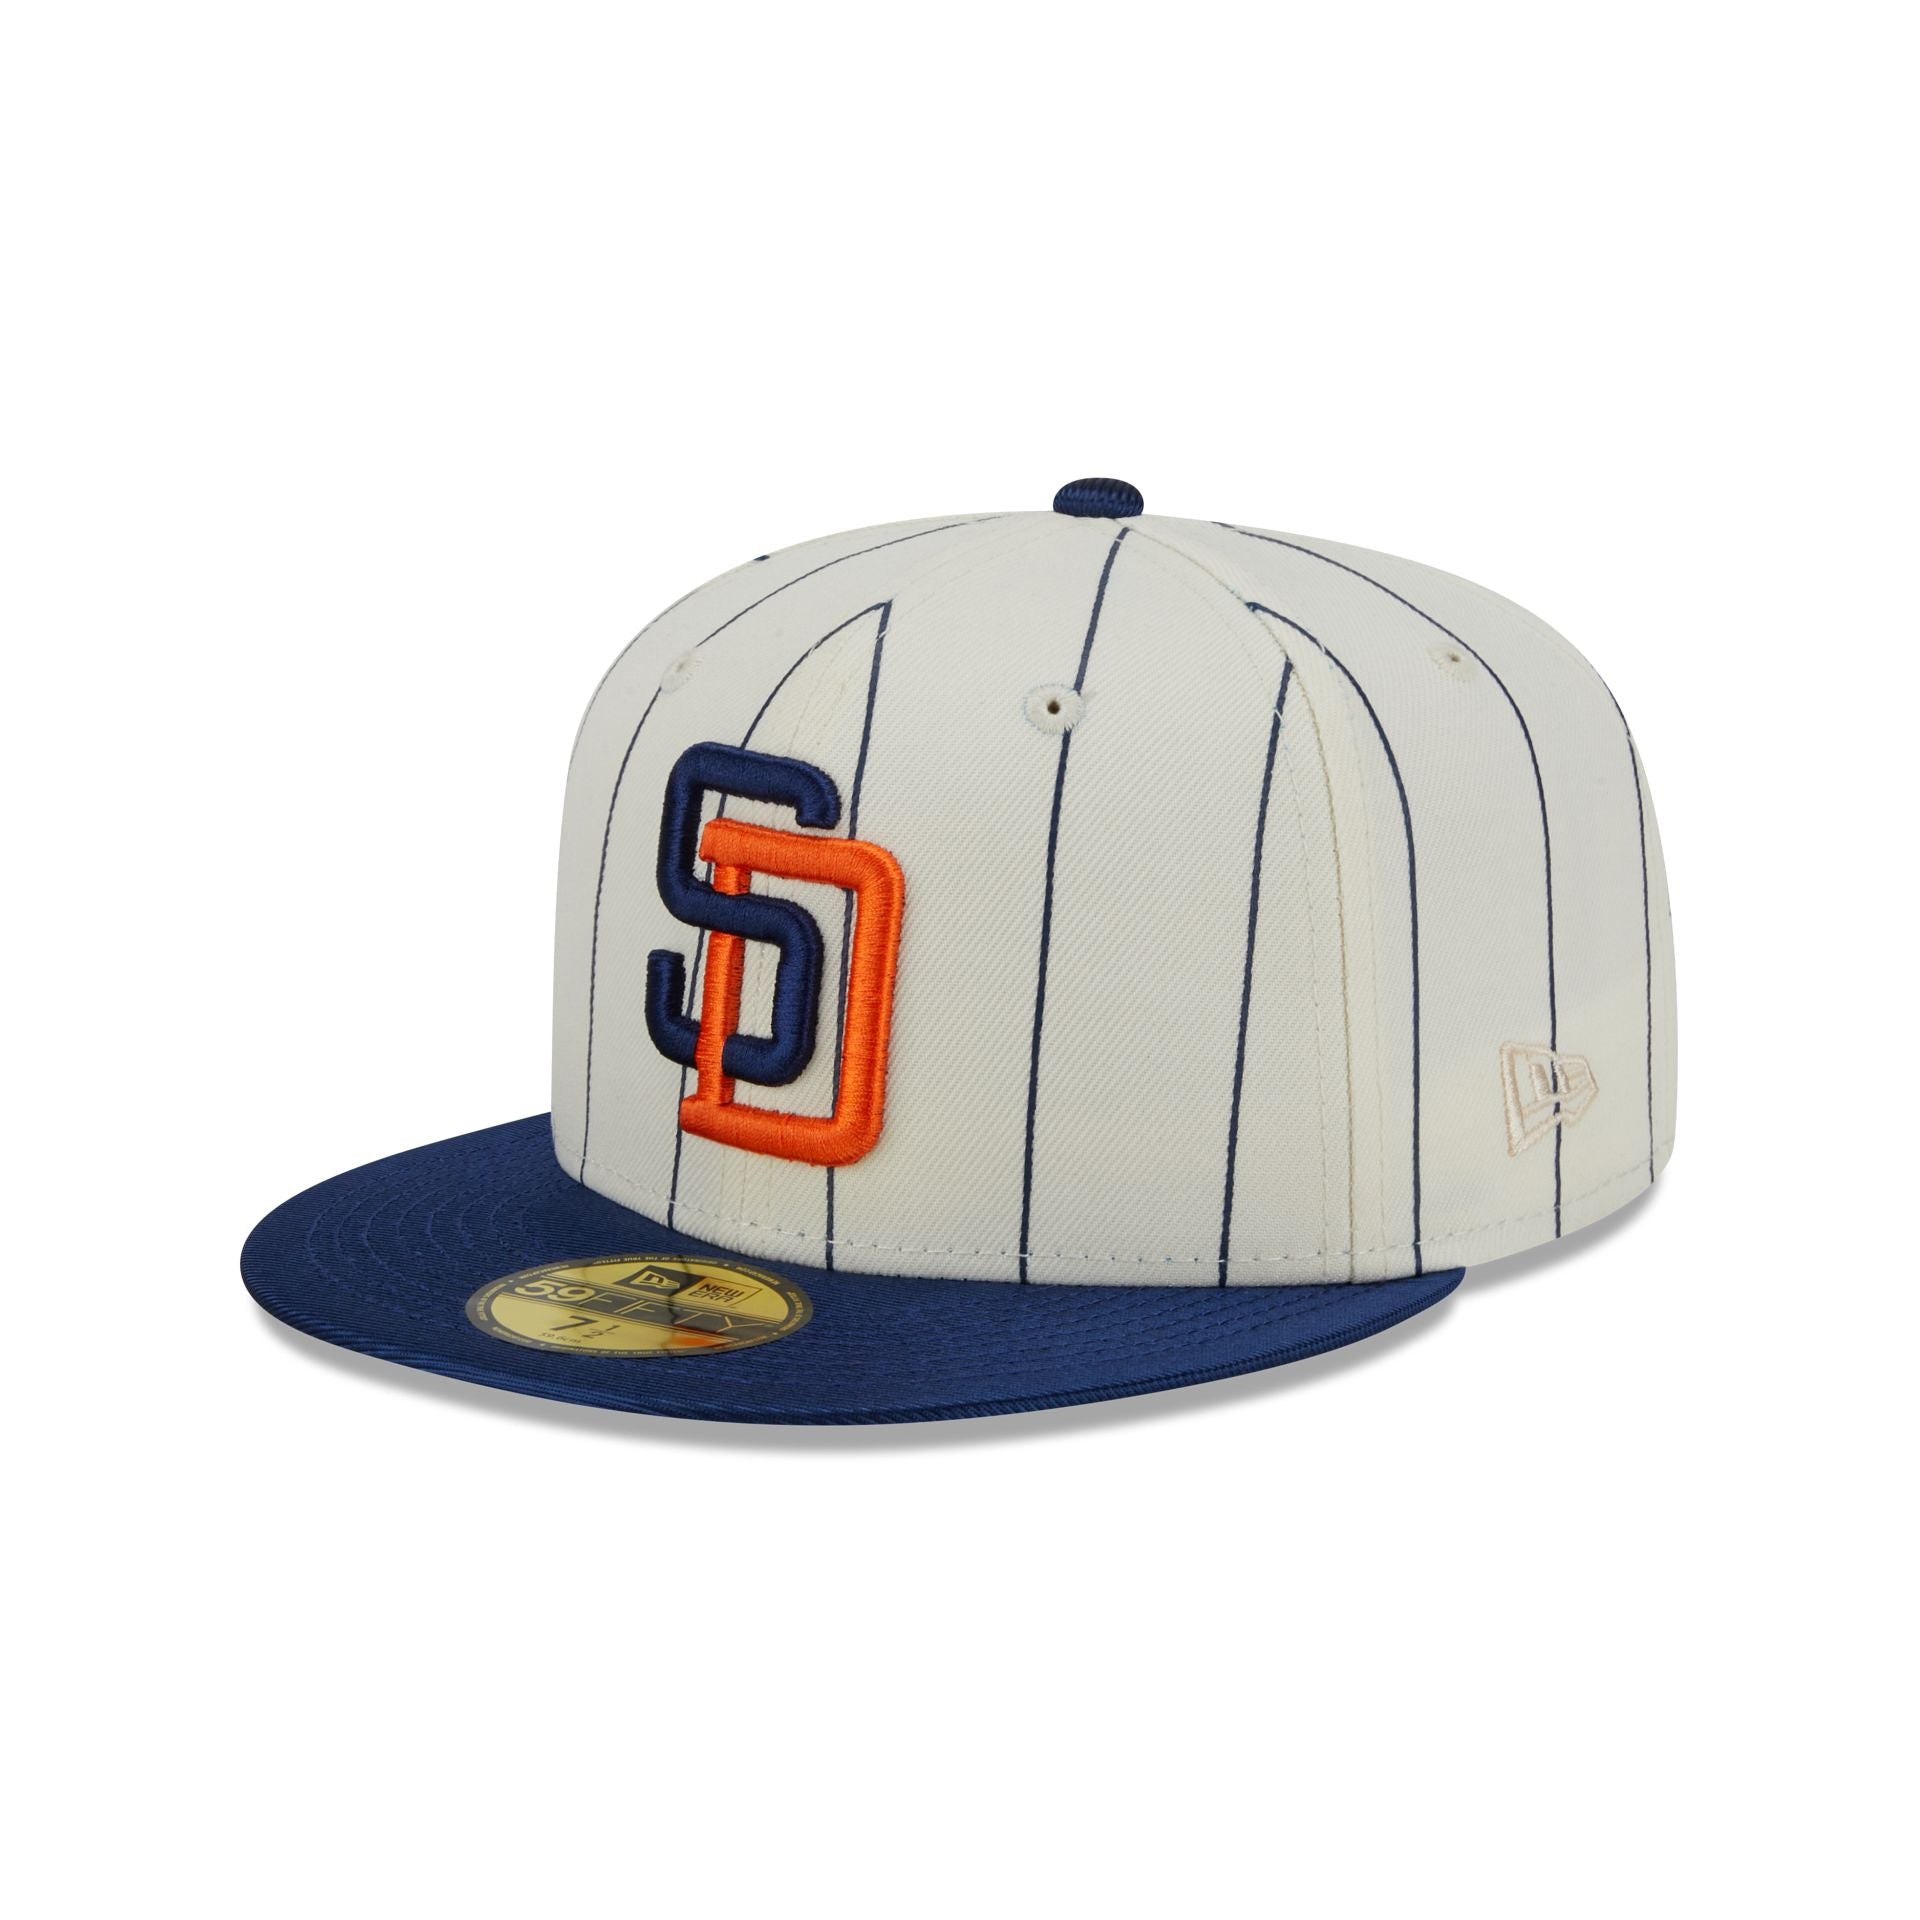 New Era 59FIFTY San Diego Padres Fitted Hat Grey White